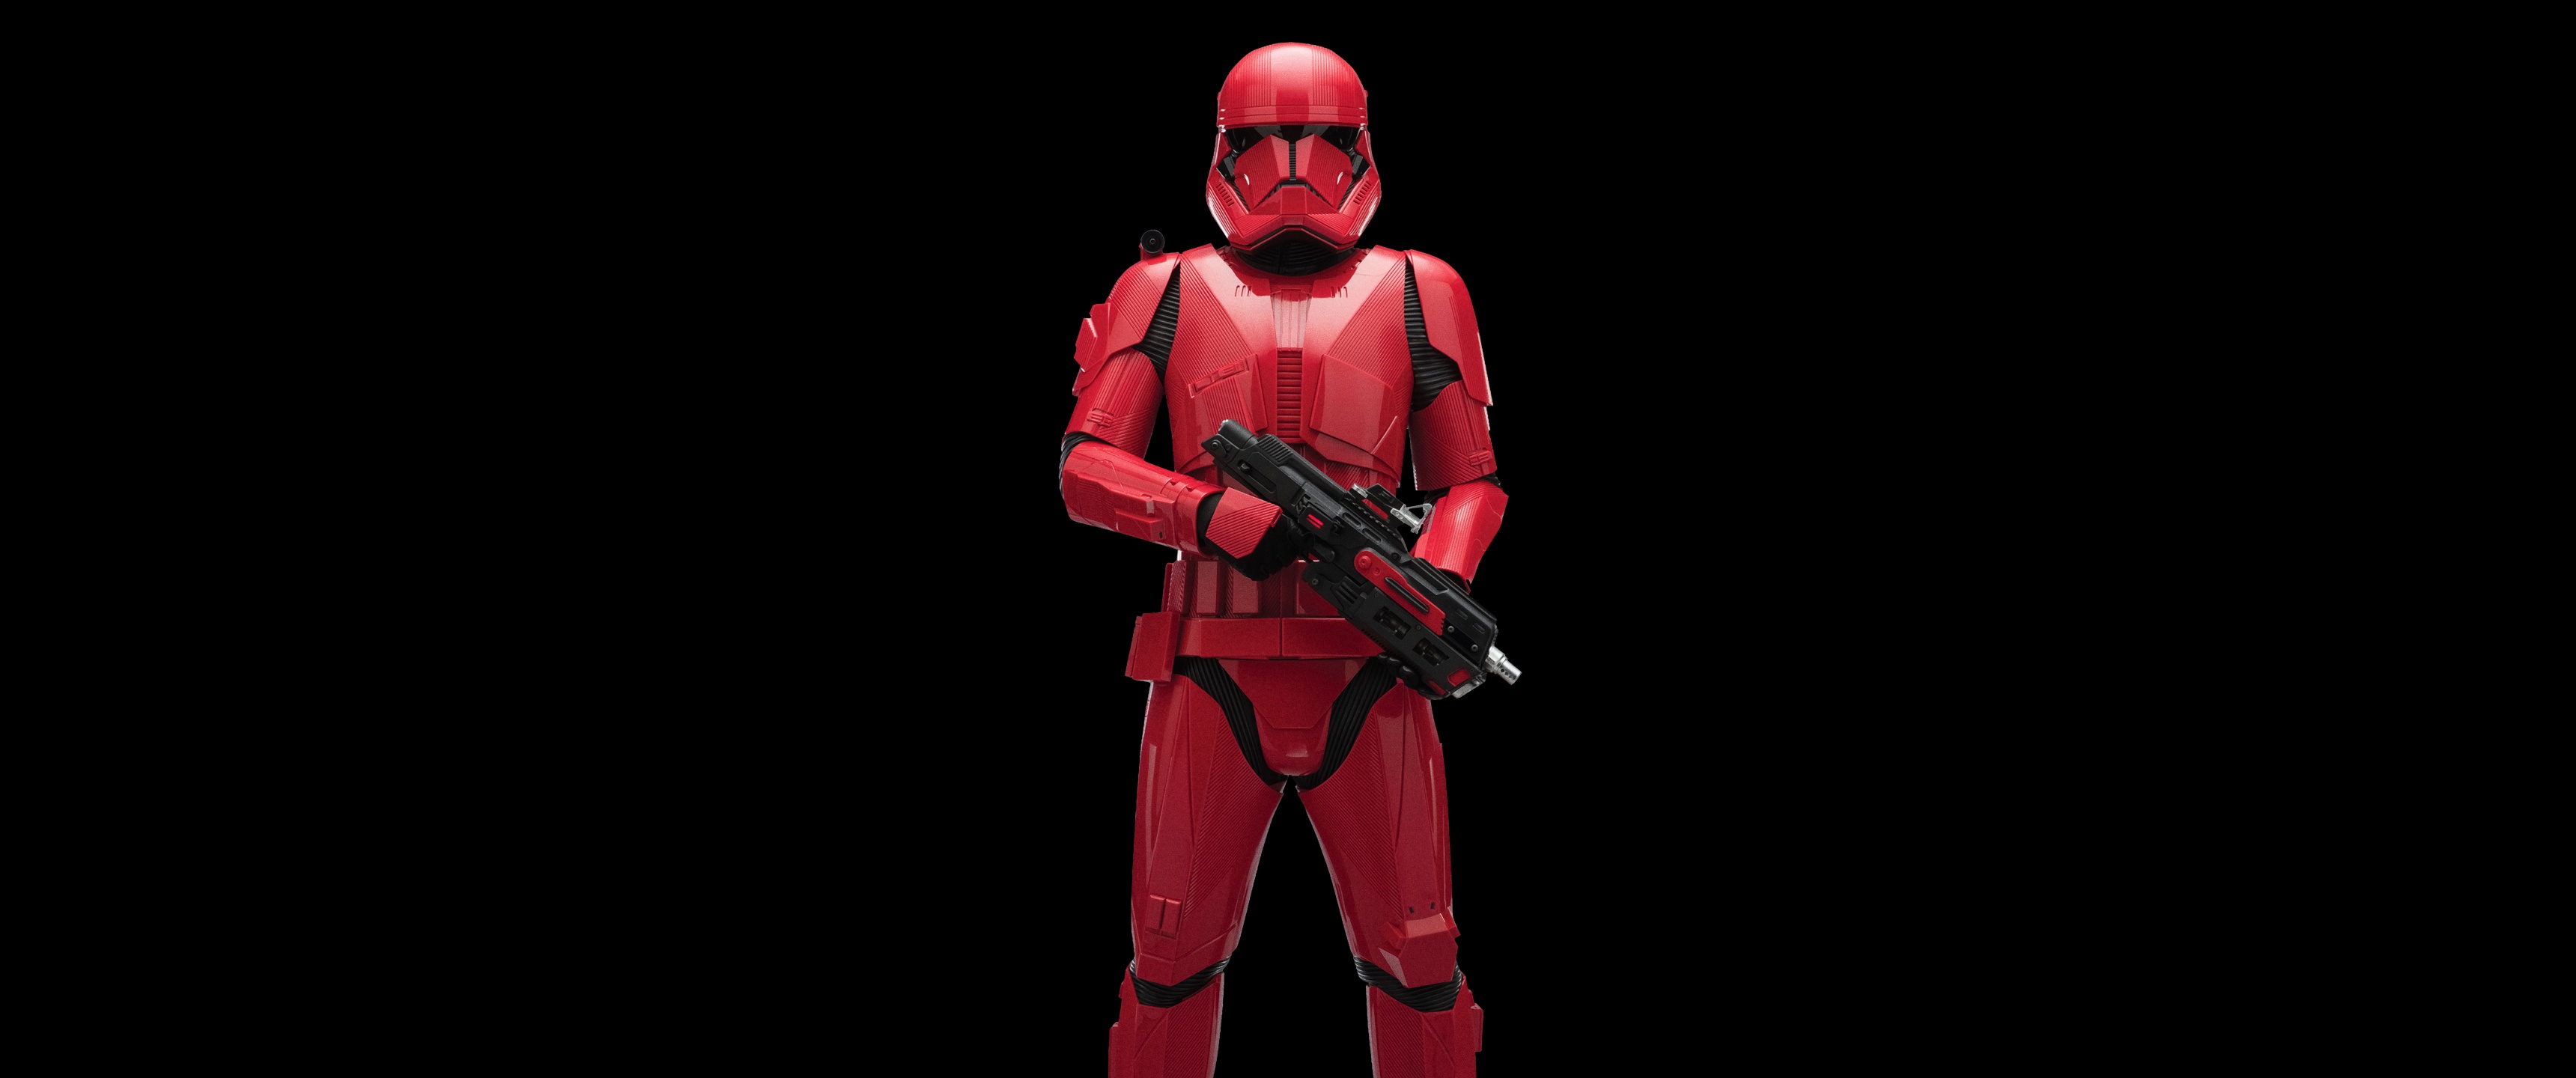 Sith Trooper Wallpapers 4K, Star Wars: The Rise of Skywalker, Movies,